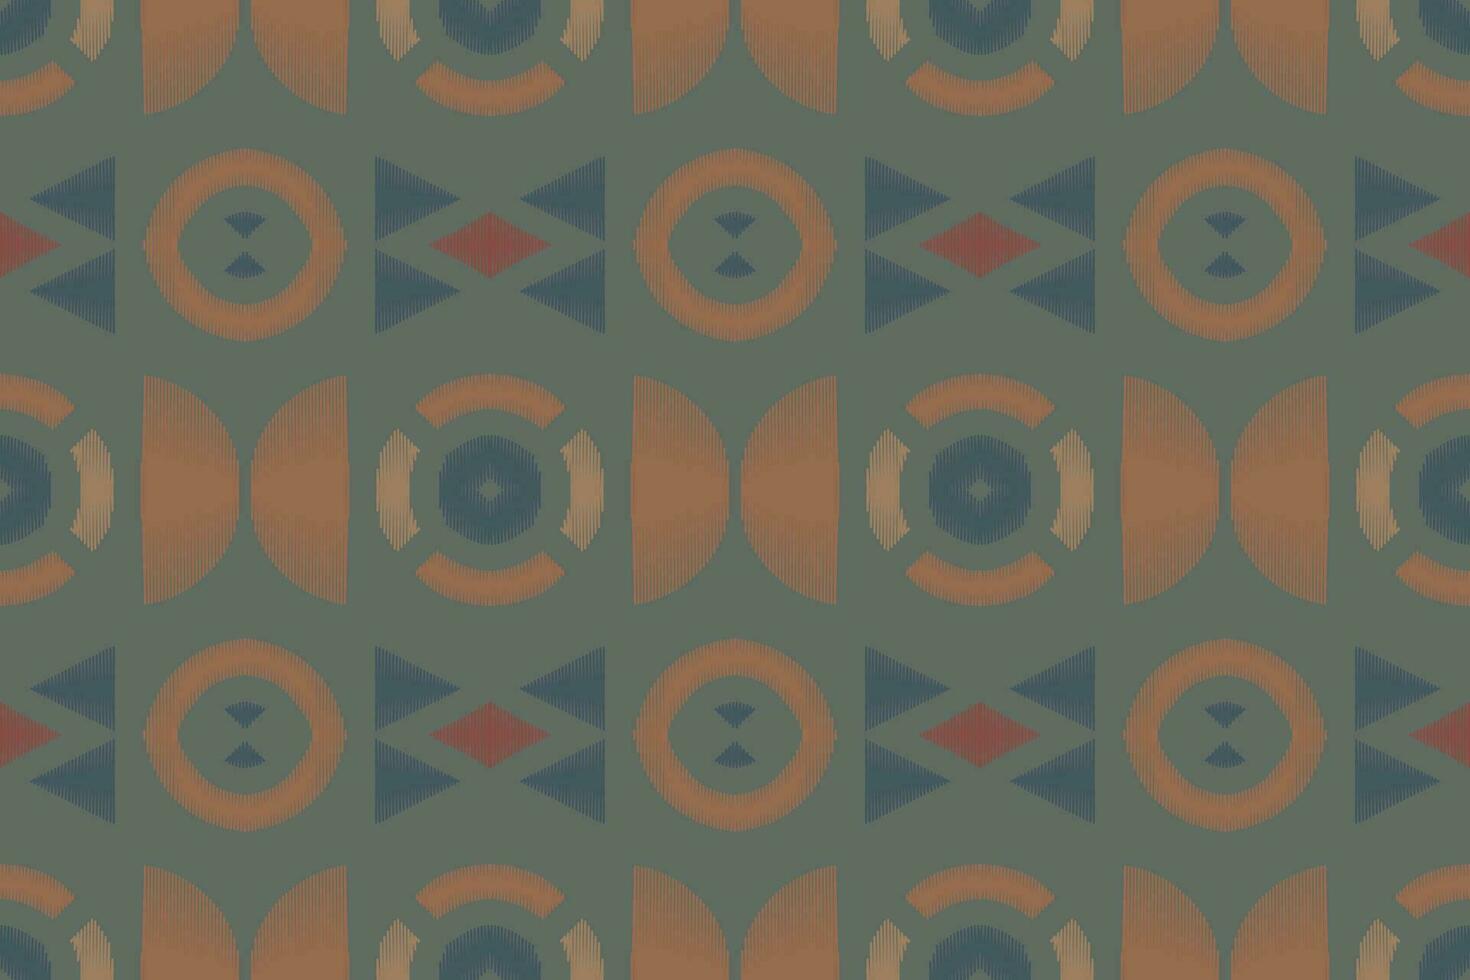 Ikat Seamless Pattern Tribal Chevron Geometric Traditional Ethnic Oriental Design for the Background. Folk Embroidery, Indian, Scandinavian, Gypsy, Mexican, African Rug, Wallpaper. vector